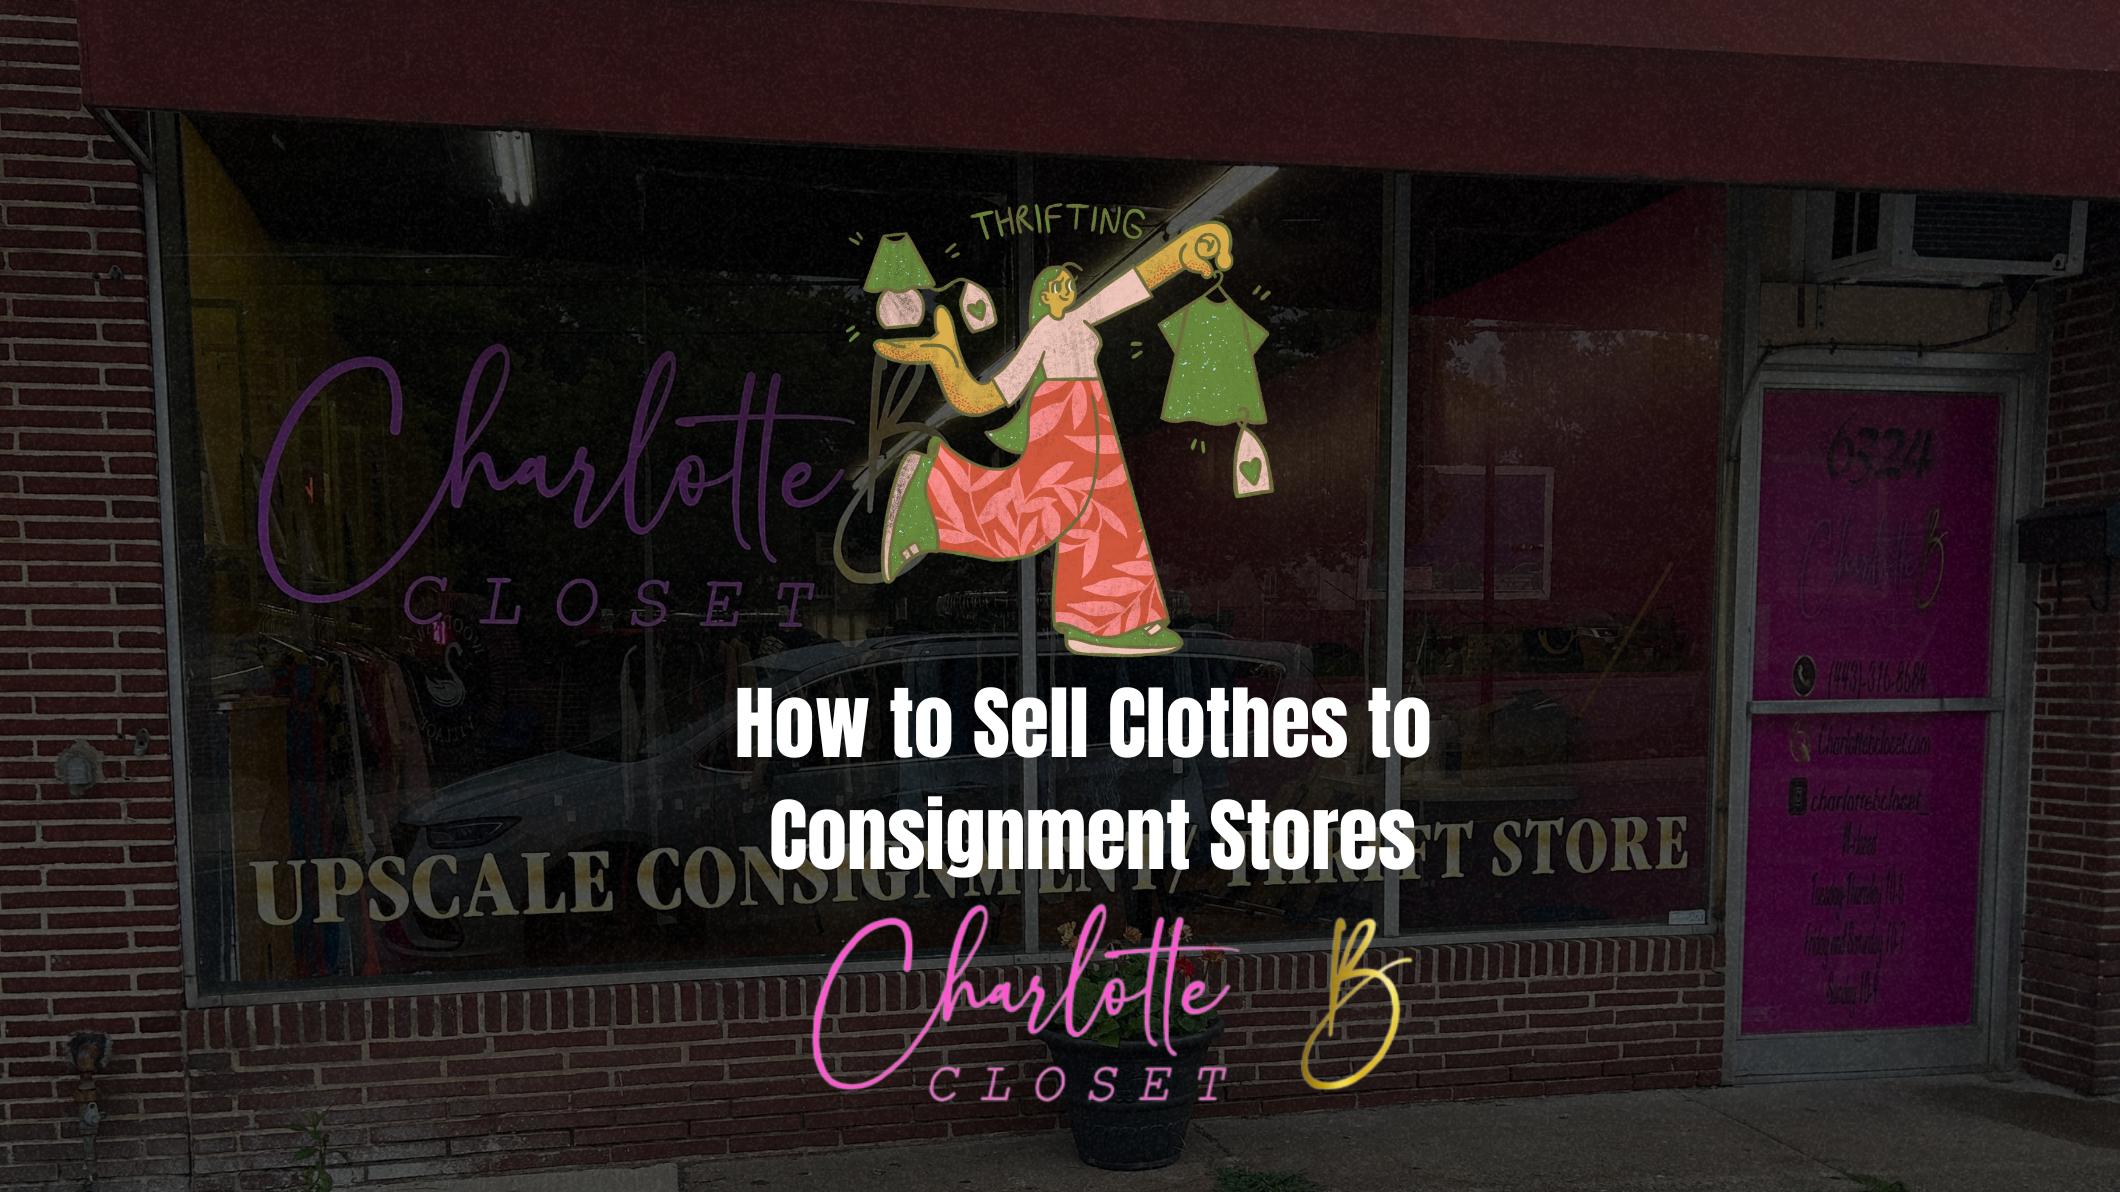 How to Sell Clothes to Consignment Stores